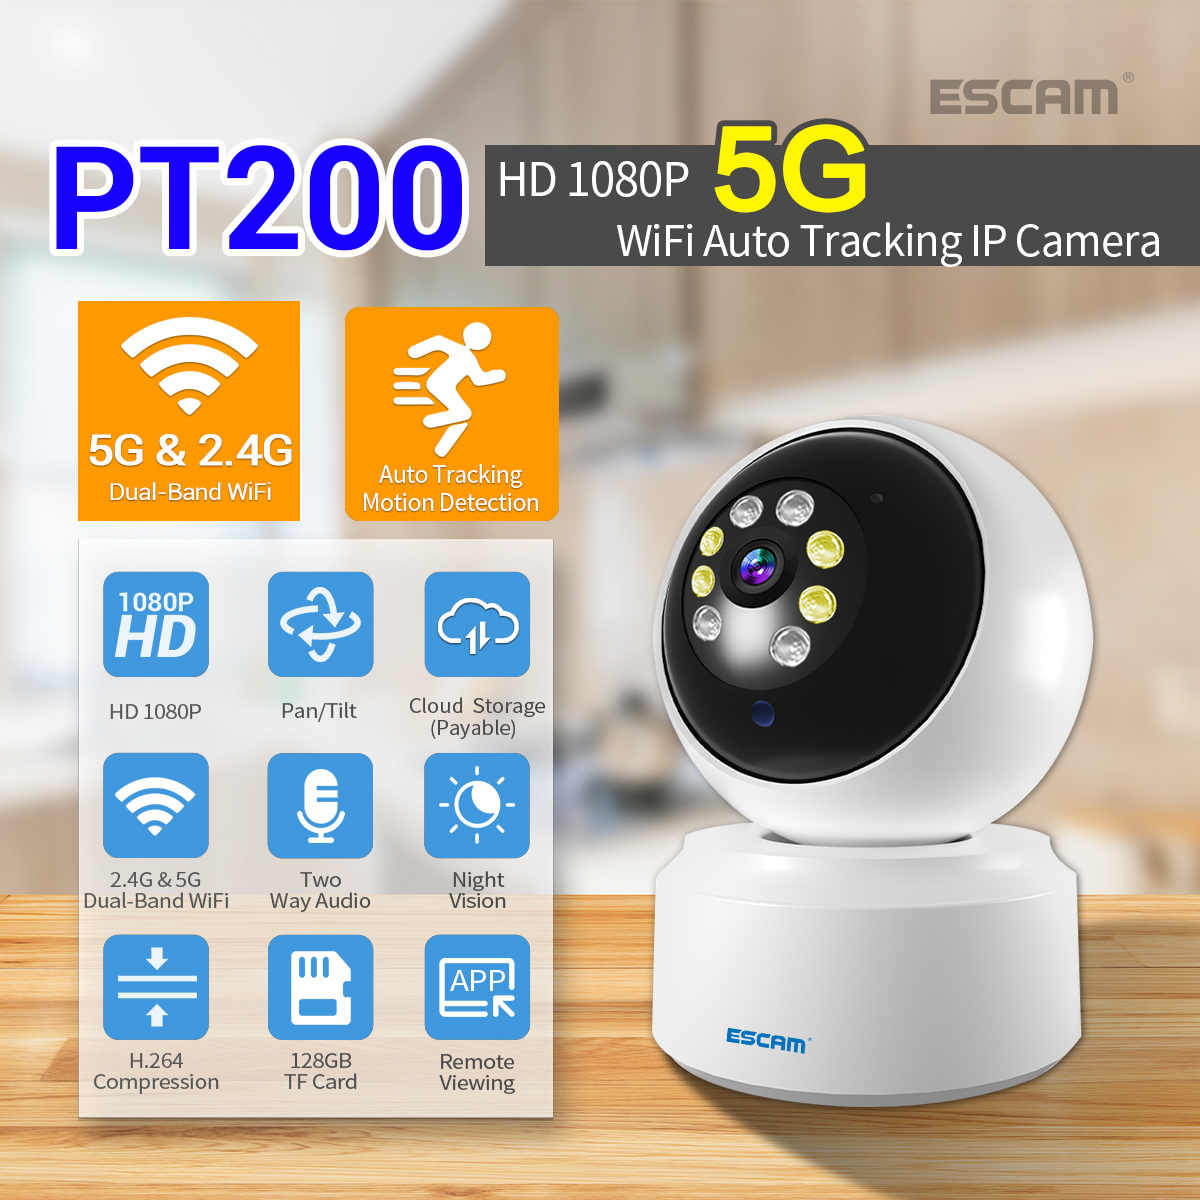 ESCAM-PT200-2MP-1080P-5G-Dome-WIFI-IP-Camera-Mobile-Tracking-Coud-Storage-Bidirectional-Voice-Night--1948164-1